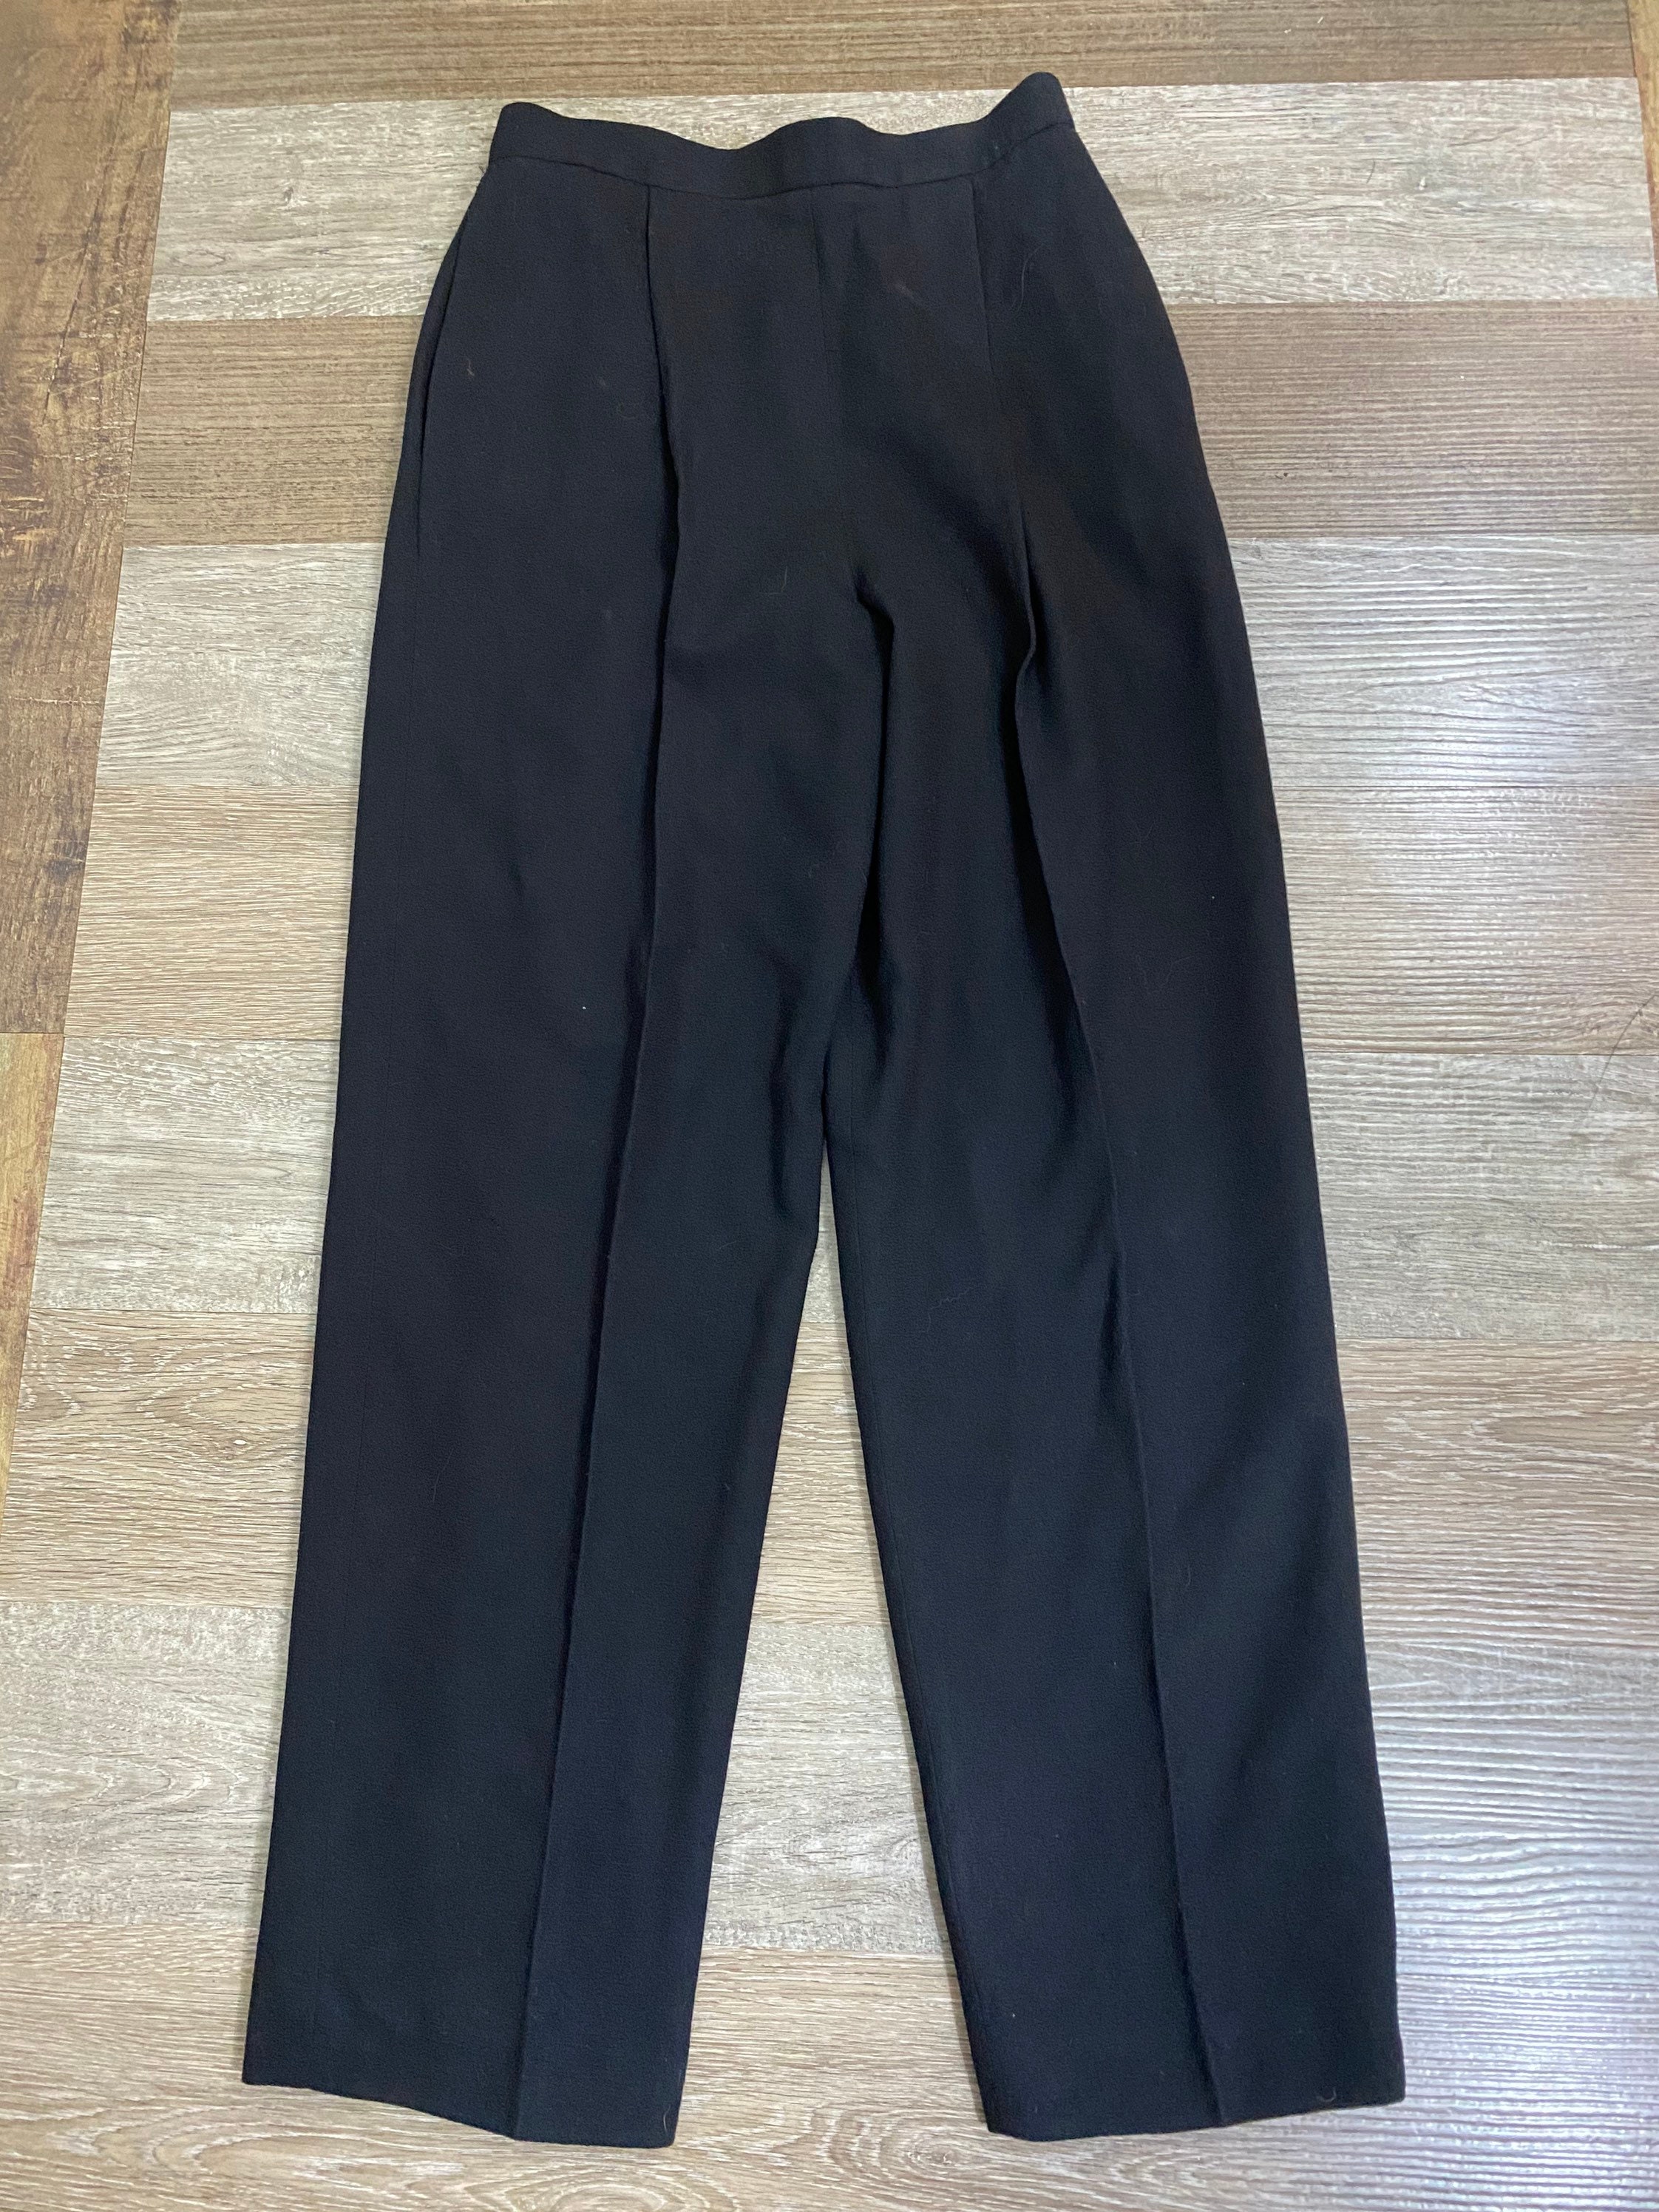 Buy Black High Waist Pants Medium Crepe Pleated Women's 90's High Waisted Size  12 Dress Pants JH Collectibles 90's Wool Lined Online in India 